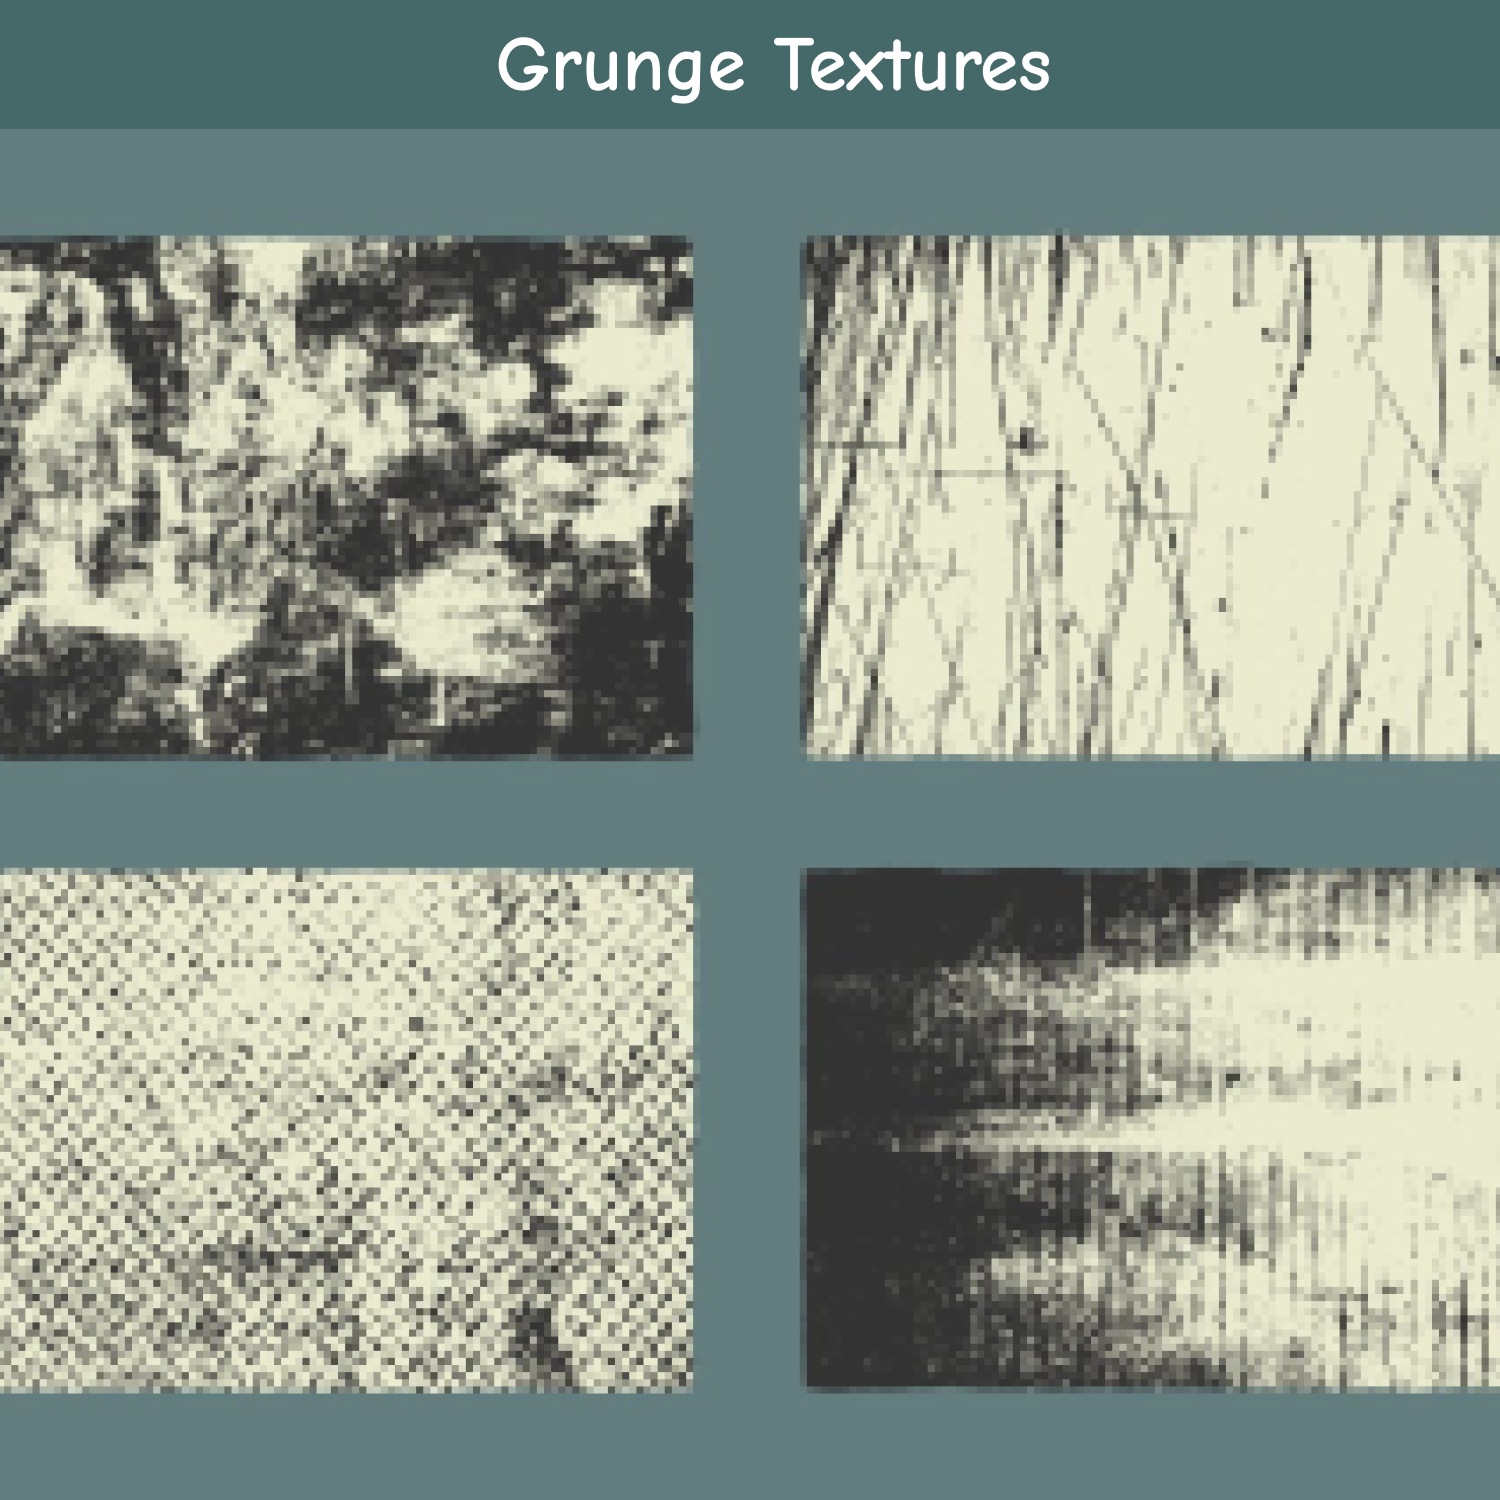 Grunge Textures cover.